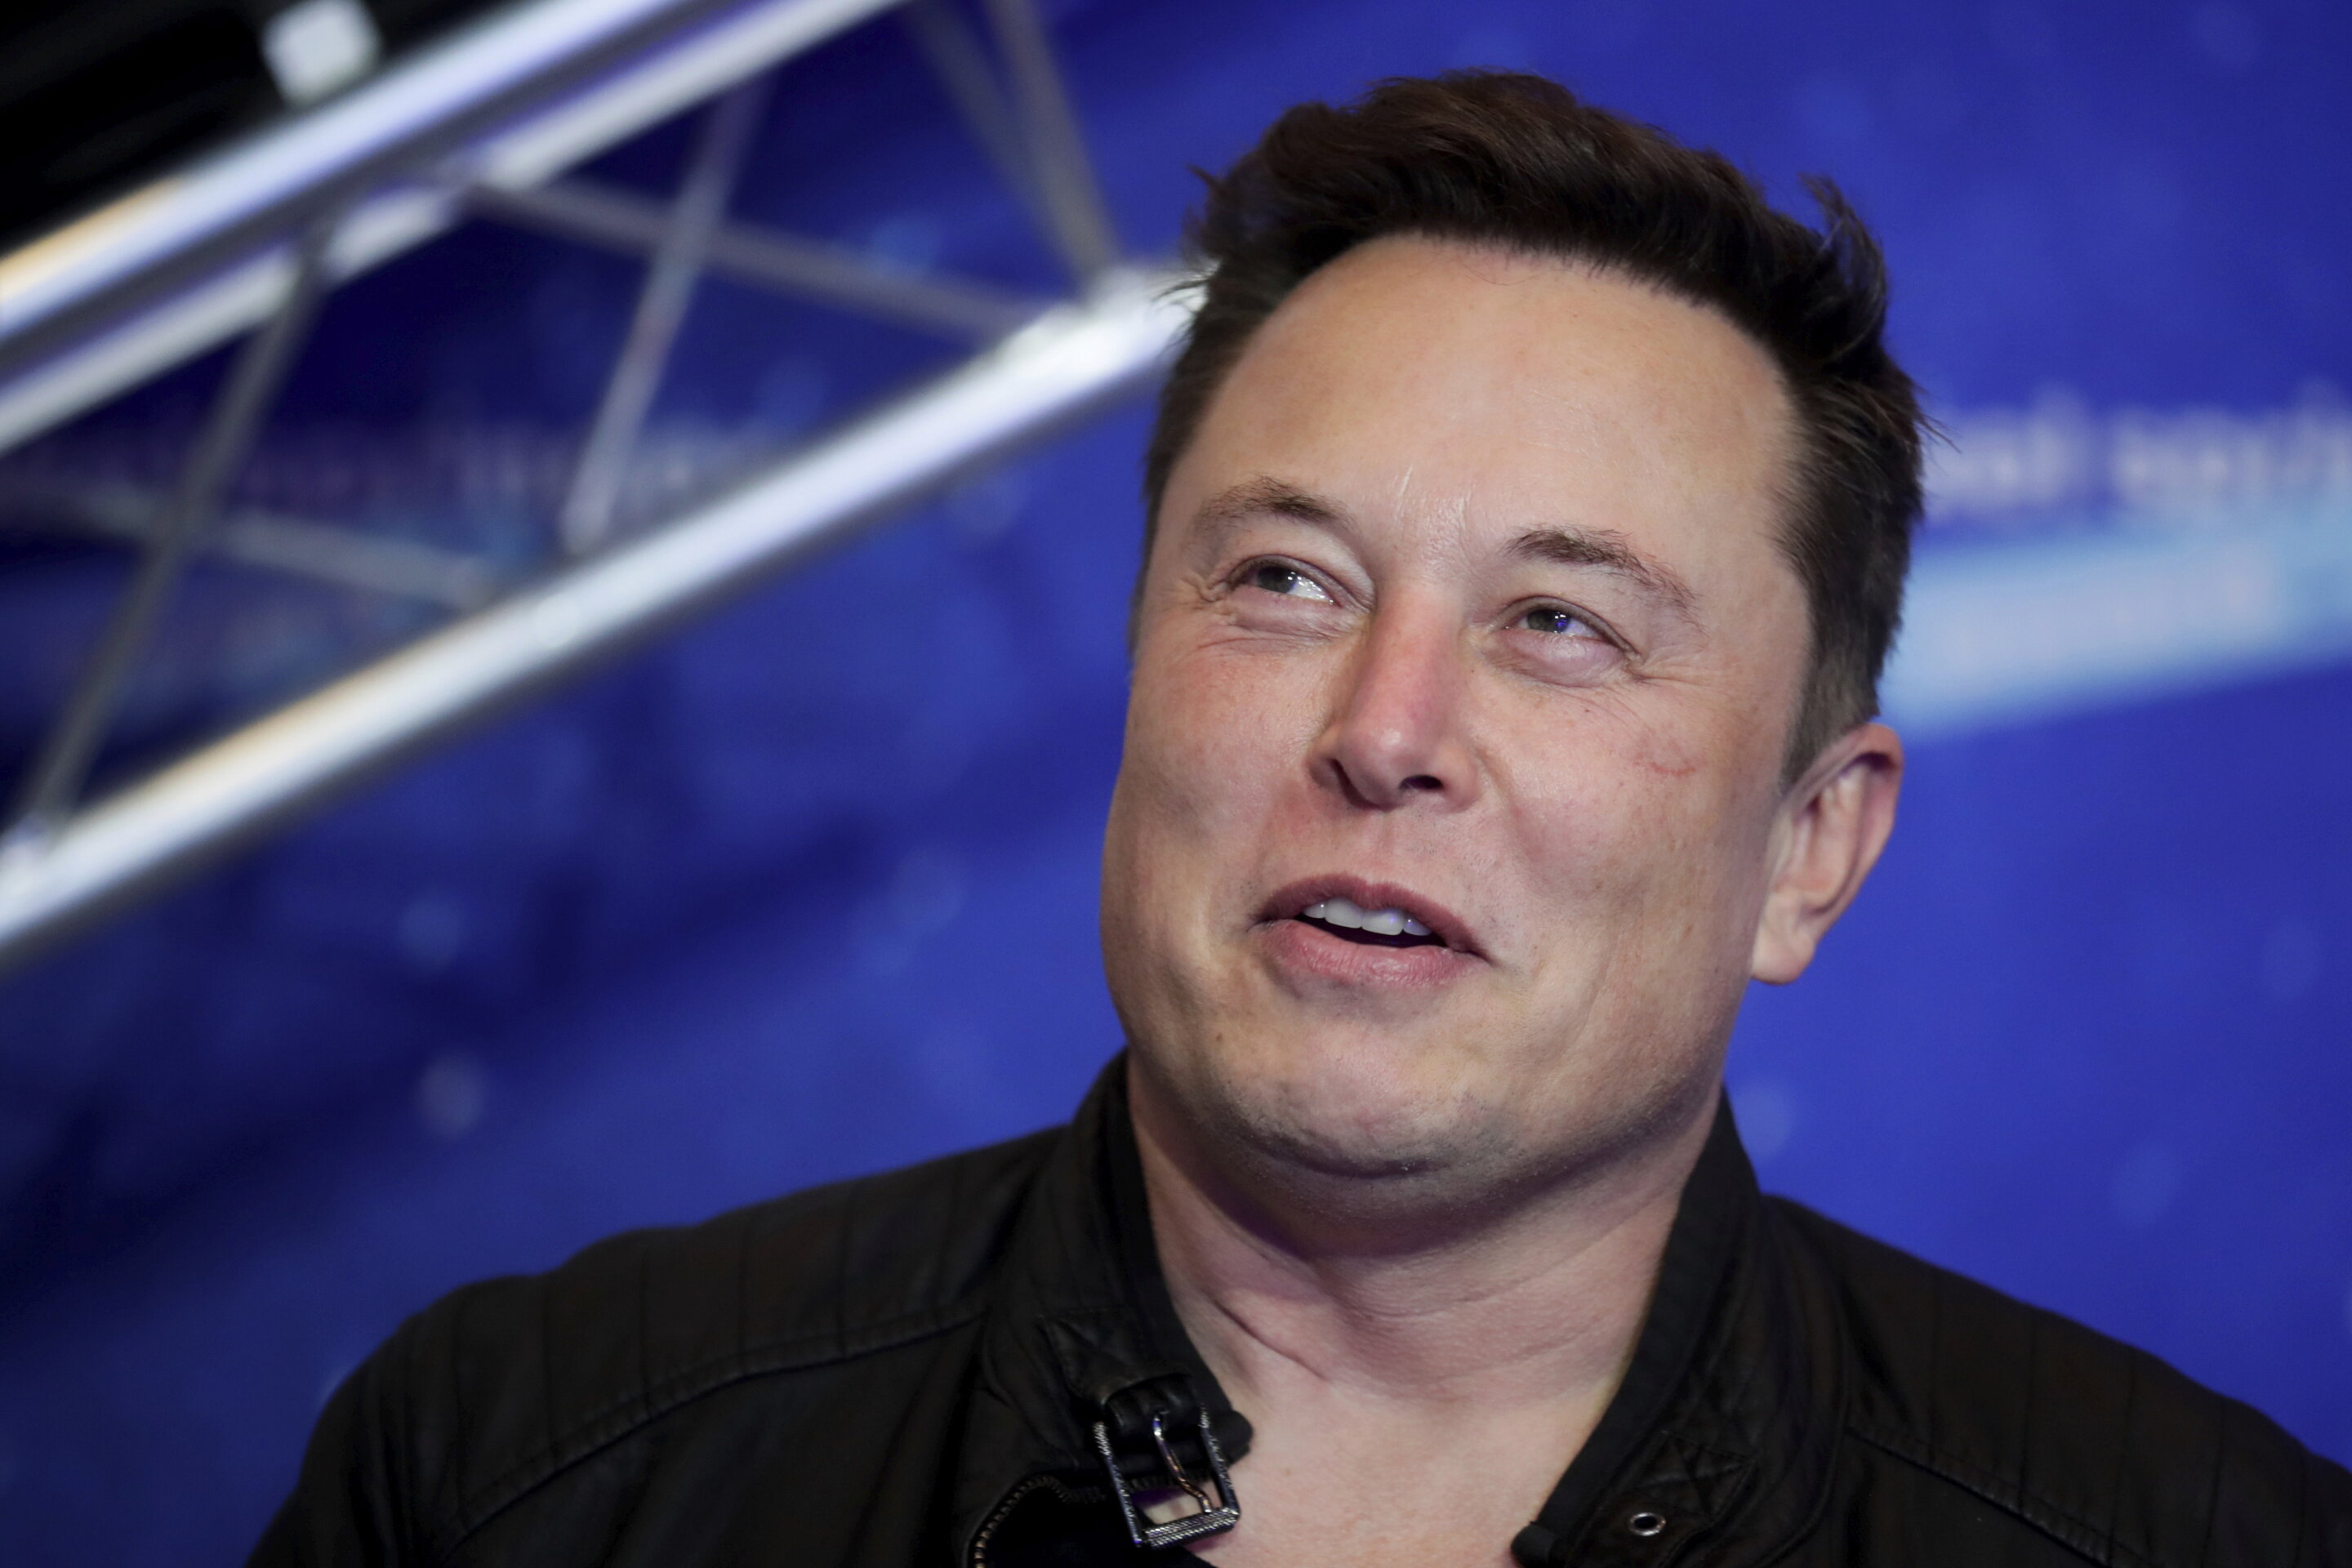 #Elon Musk buys Twitter for $44B and will privatize company